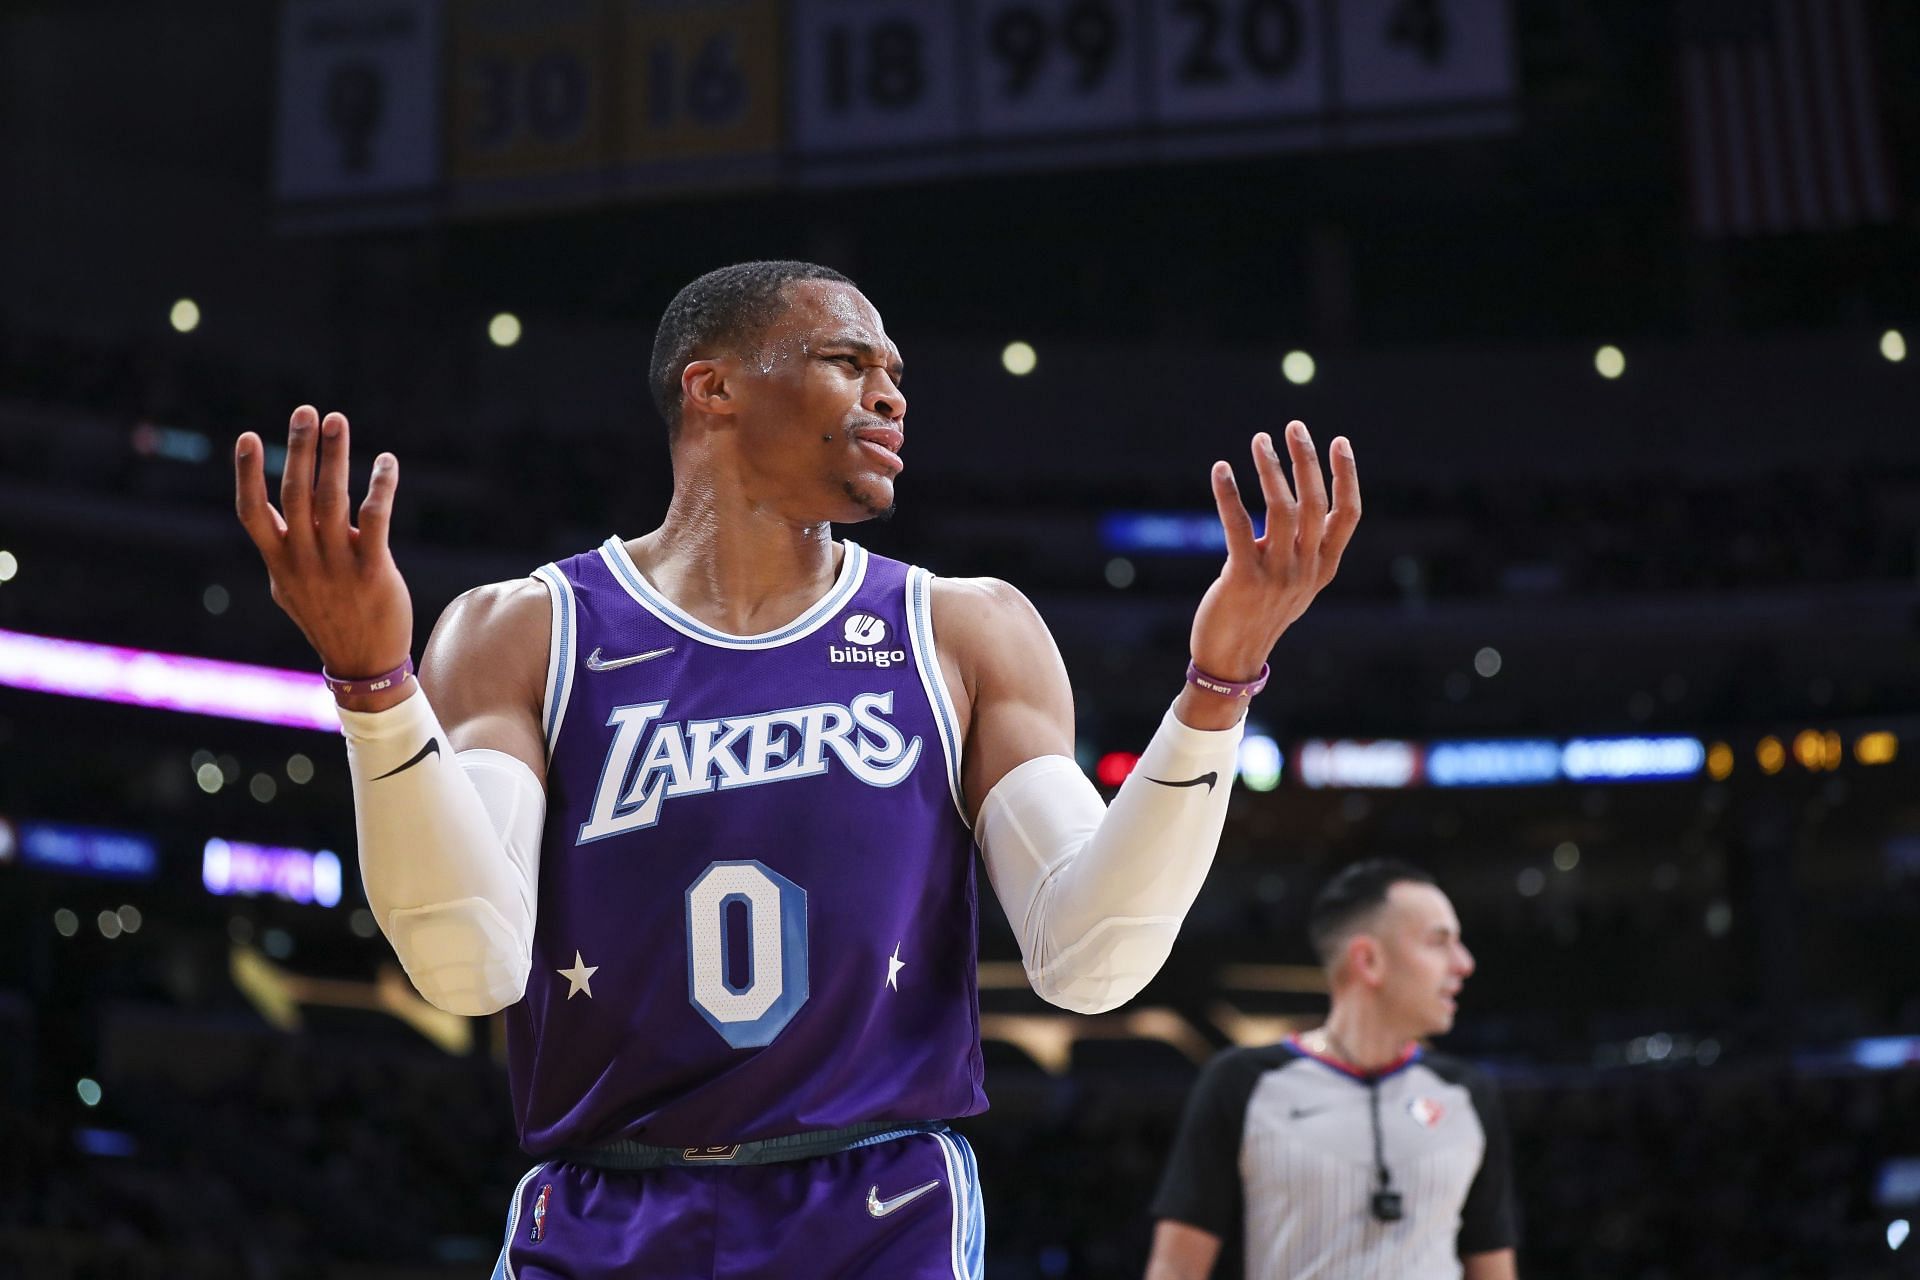 Russell Westbrook reacts to a play during a game for the LA Lakers.